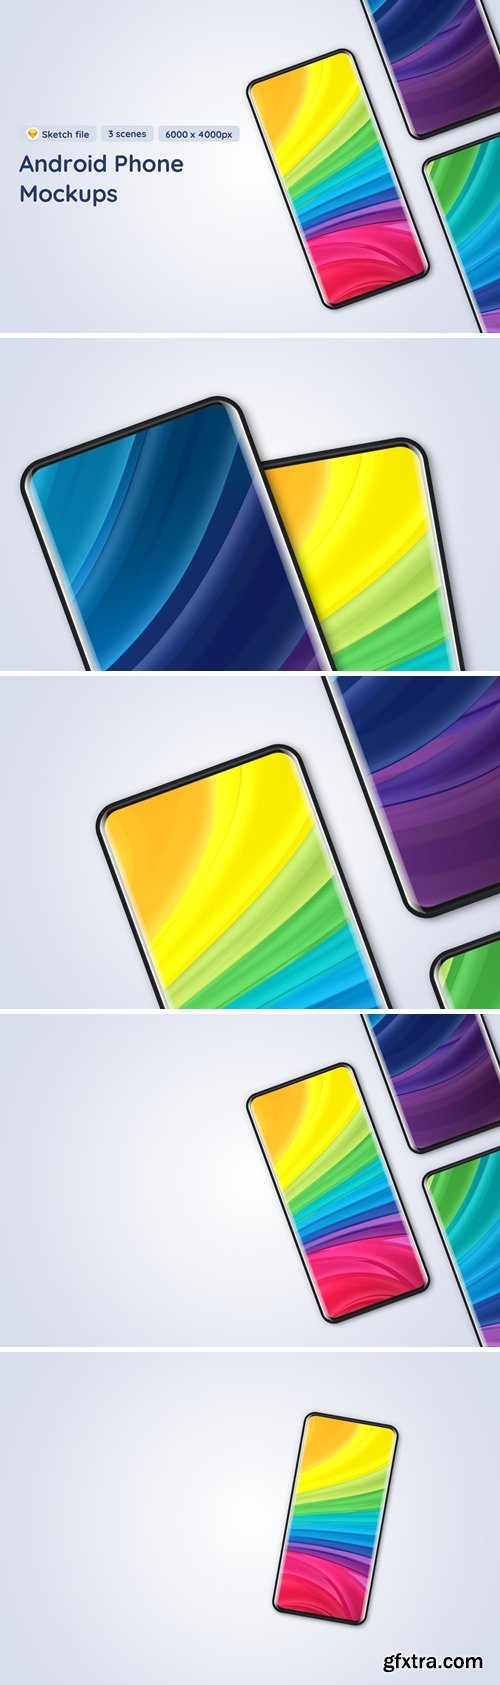 Android Phone Sketch Mockups - 3 scenes